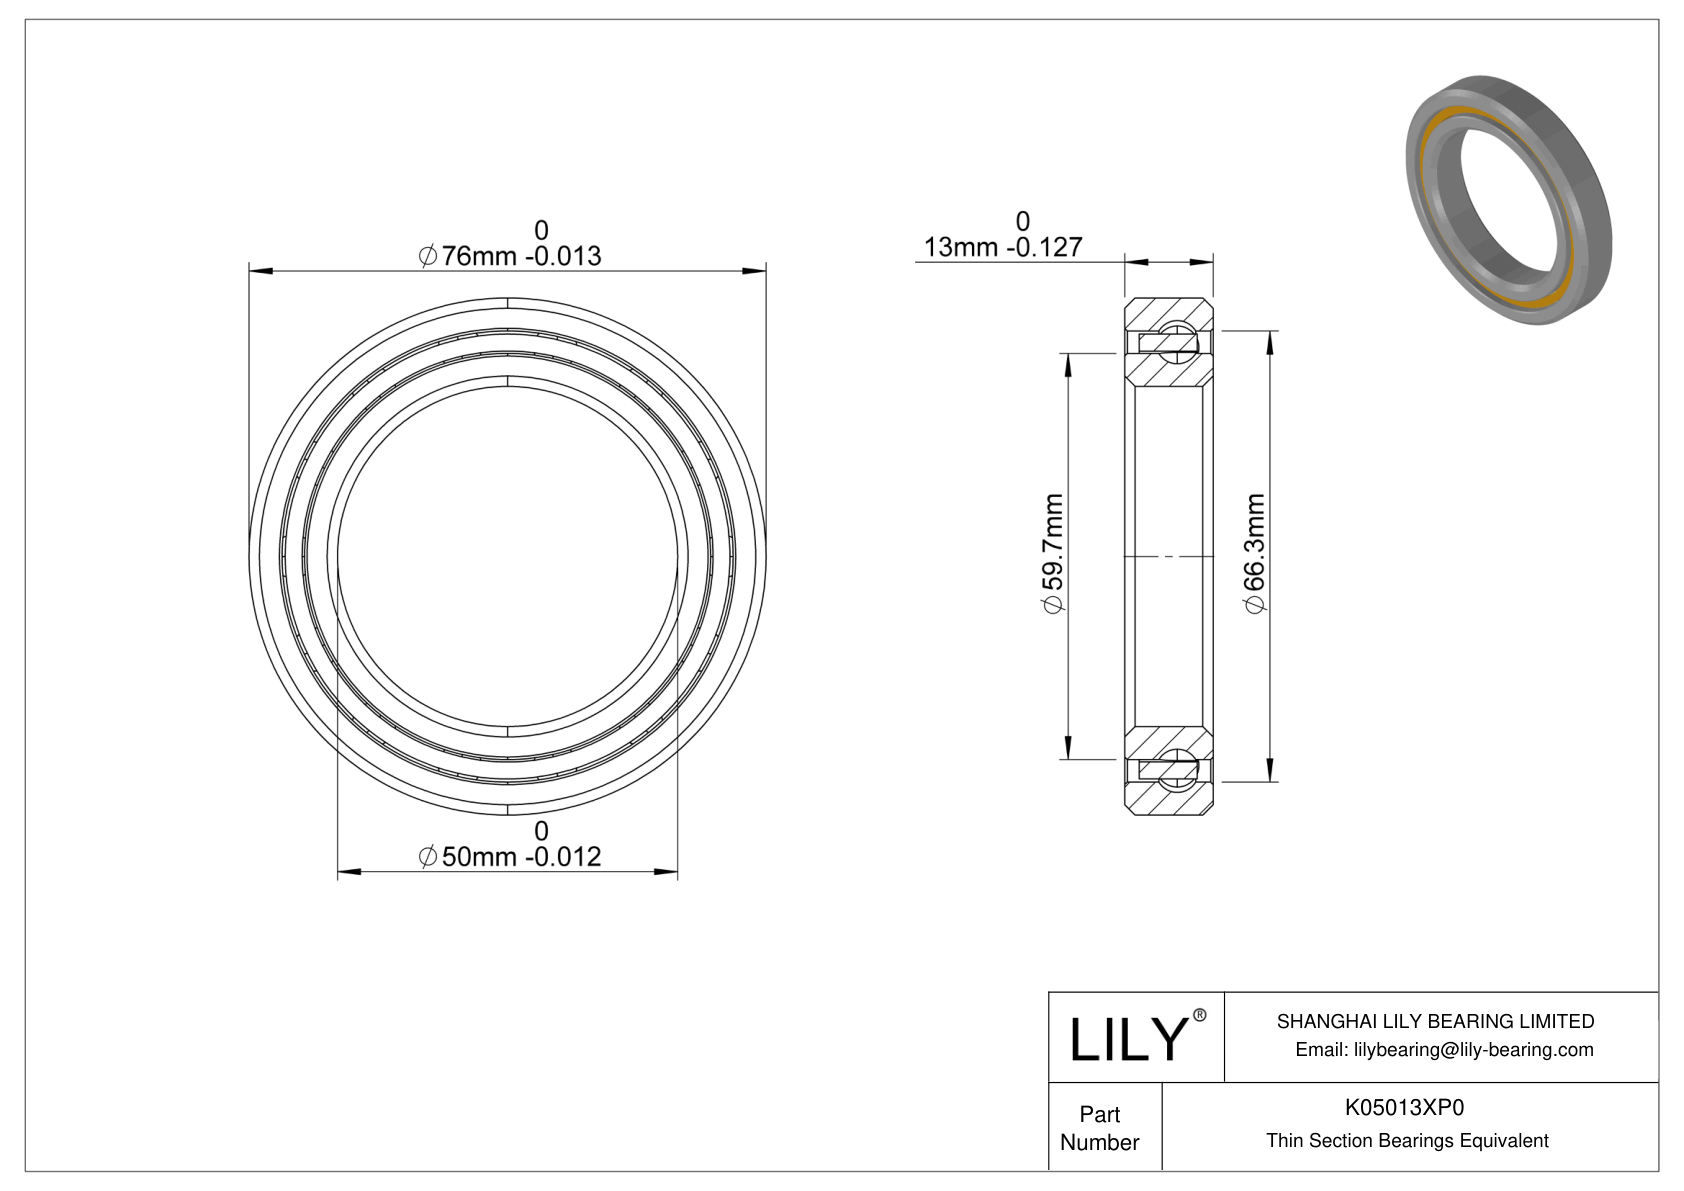 K05013XP0 Constant Section (CS) Bearings cad drawing